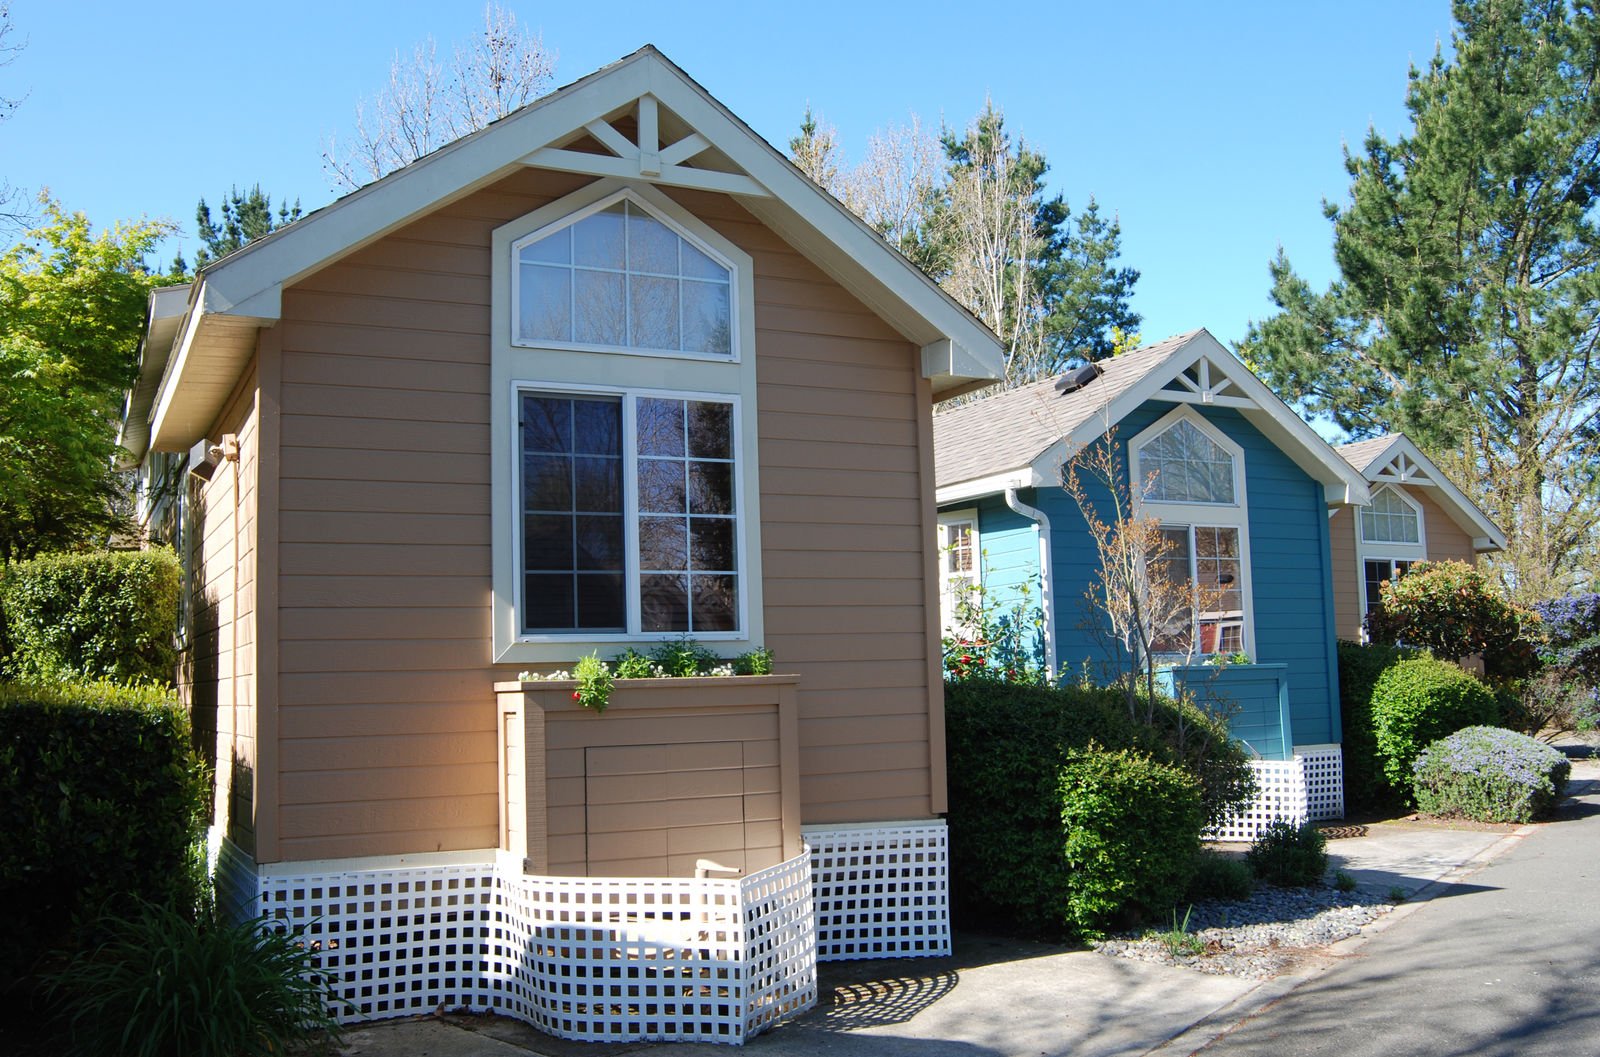 What do I need for my tiny house insurance in California?